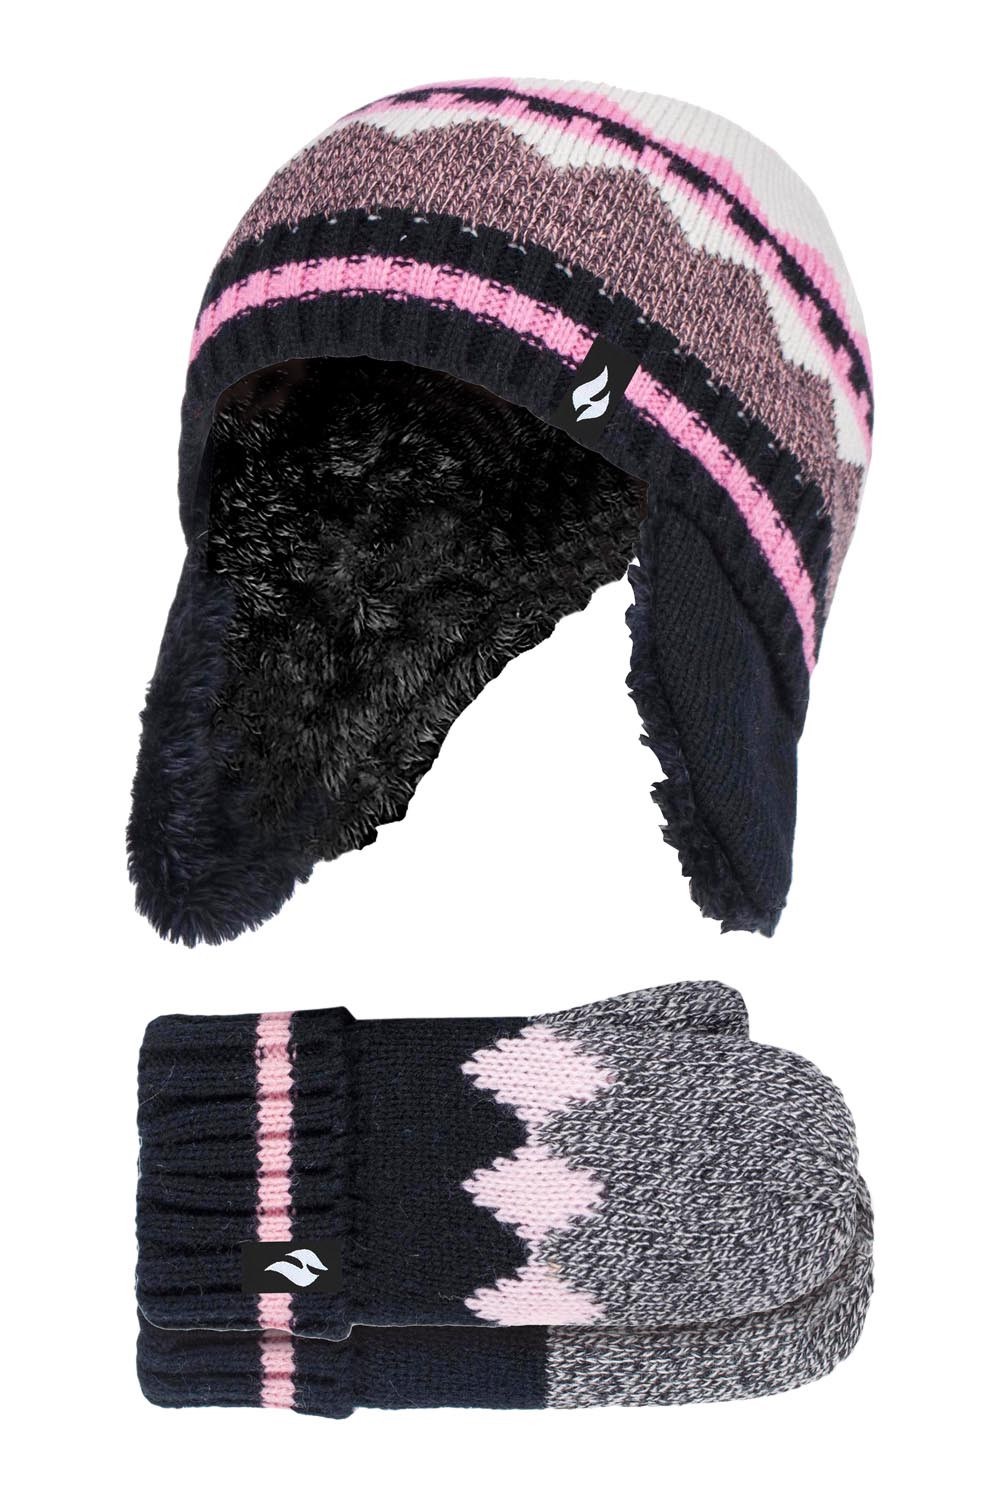 Kids Thermal Trapper Hat and Mittens Set -